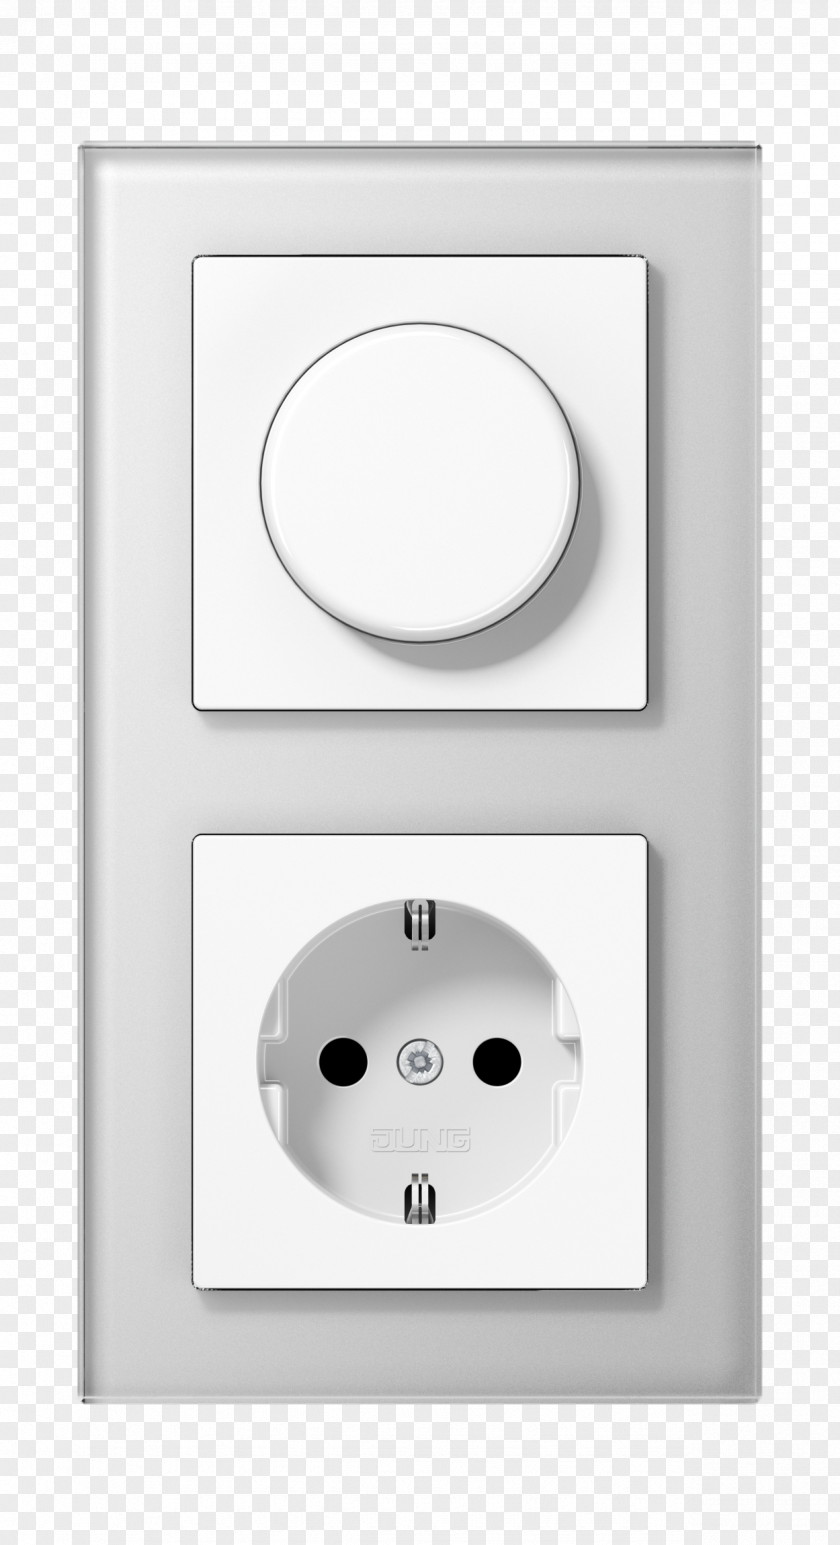 AC Power Plugs And Sockets Esprit Holdings Factory Outlet Shop Network Socket Contactdoos PNG